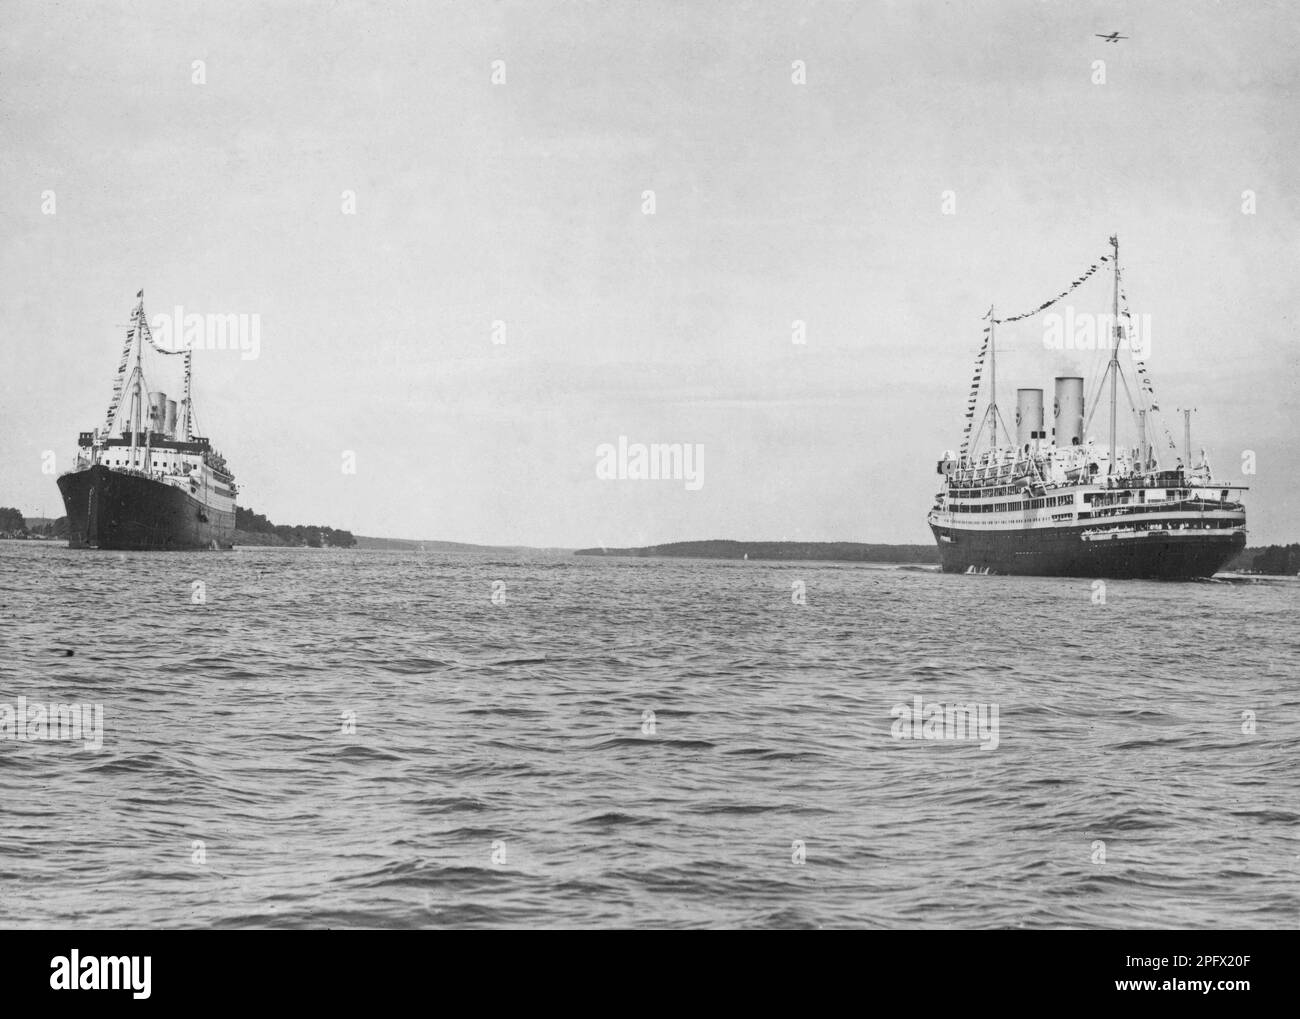 Svenska Amerika Linien's ships M/S Kungsholm and M/S Gripsholm meet in the Stockholm archipelago in July 1930. The ships built in the 1920s were sister ships and the most modern ships on the Atlantic at the time. Gripsholms with a length of 168.5 meters and a width of 22.7 meters and Kungsholm, which was 181.32 and 22 meters wide, were veritable floating luxury palaces and celebrities of the time traveled on them. Both ships ended their days as scrap. Stock Photo